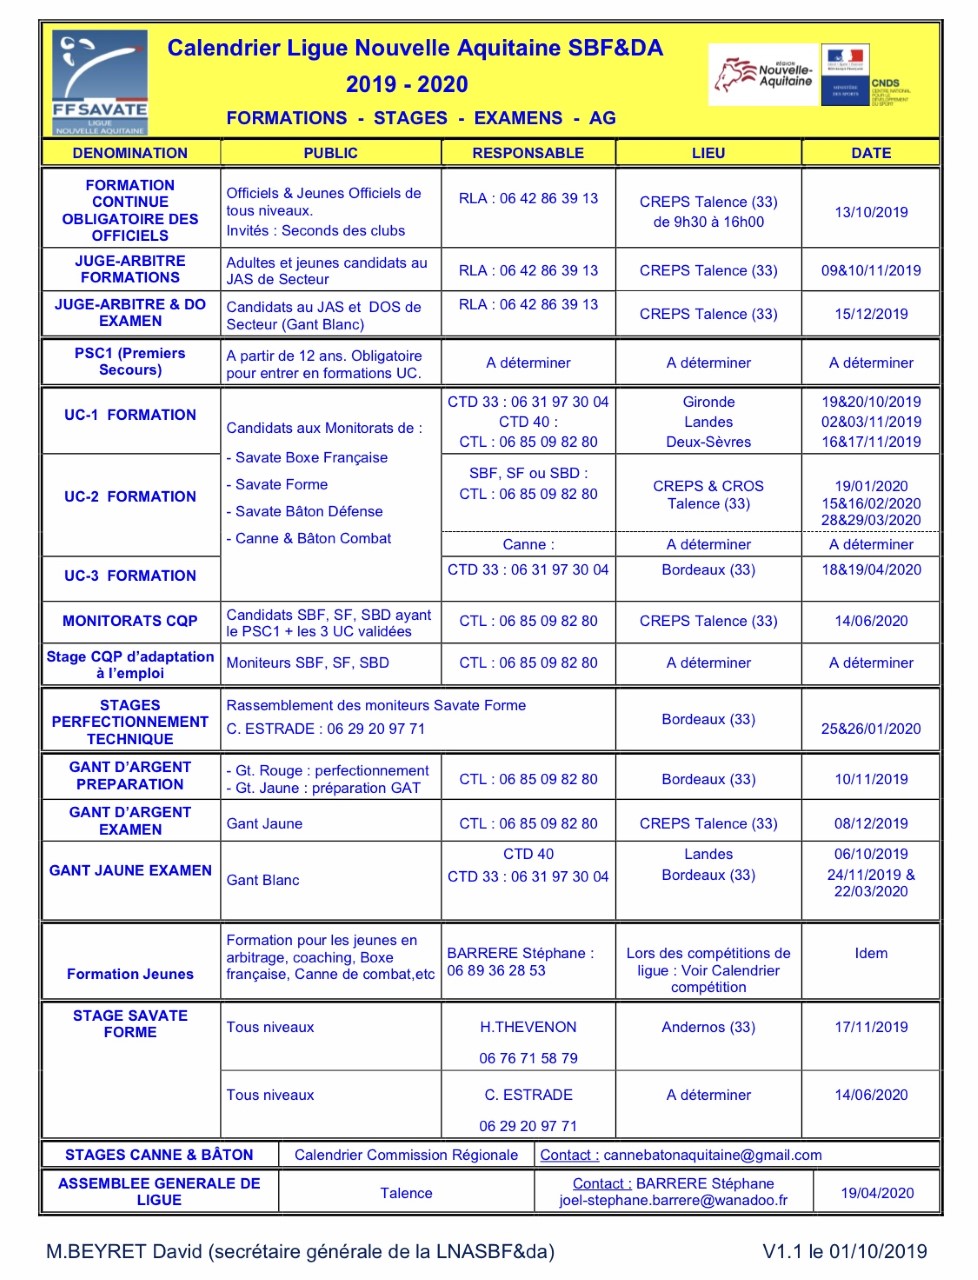 Calendrier des Formations 2019-2020